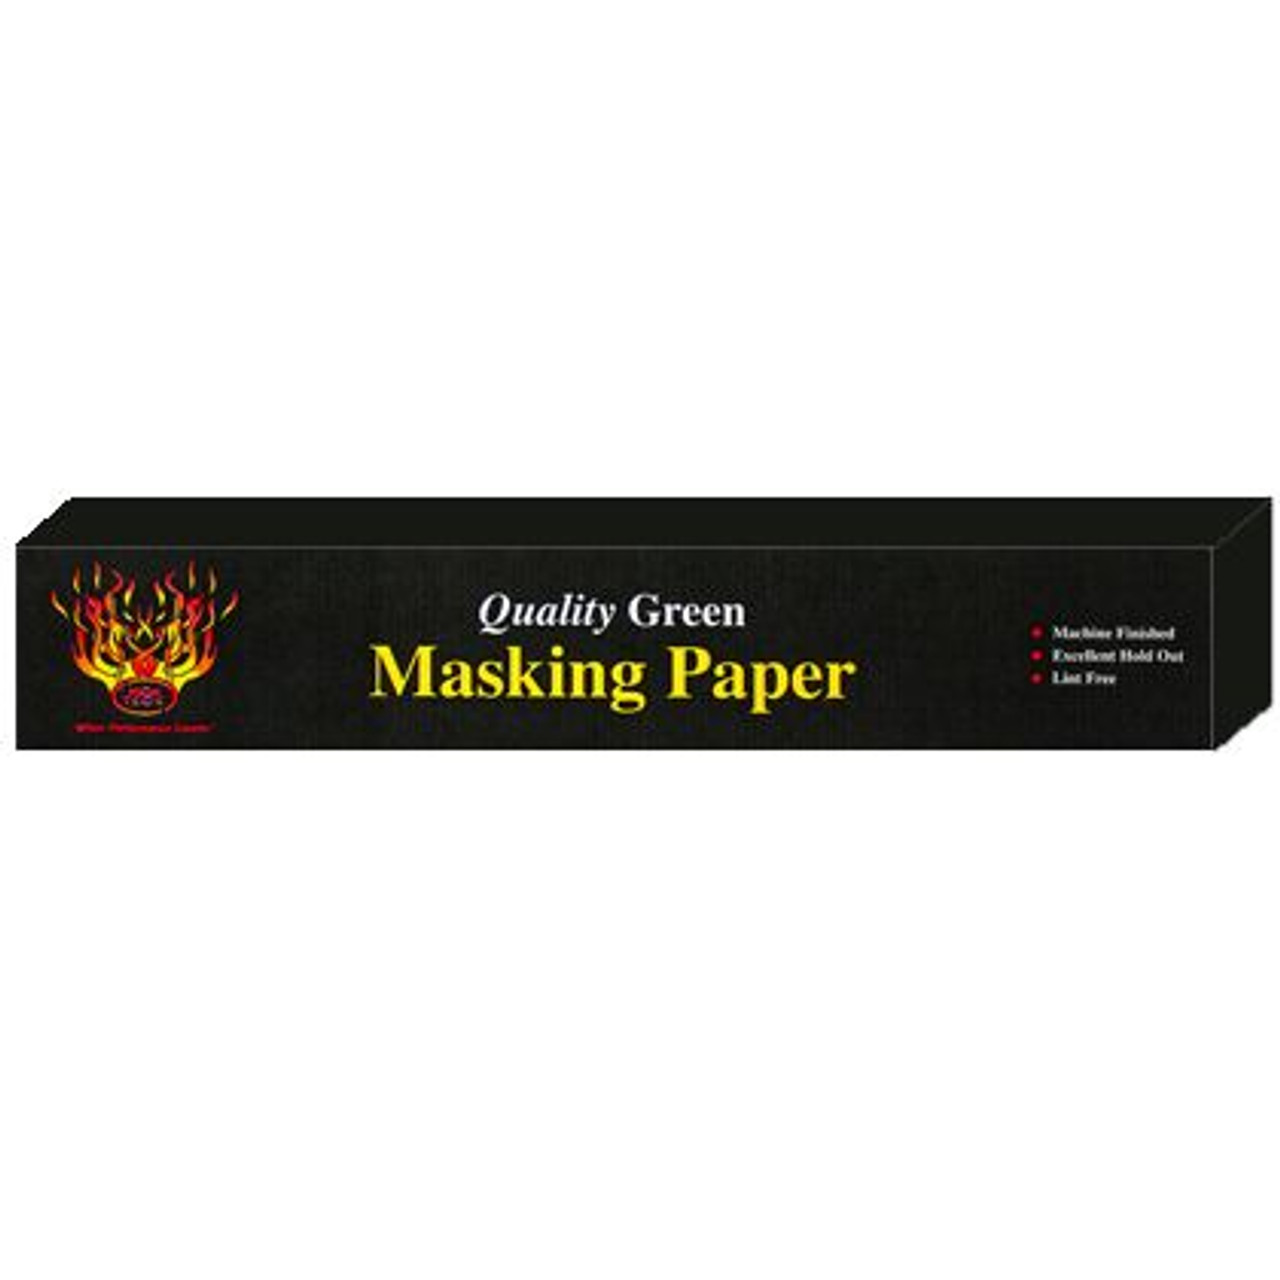 Quality Green Masking Paper, Weight: 35#, Size: 24" X 500'